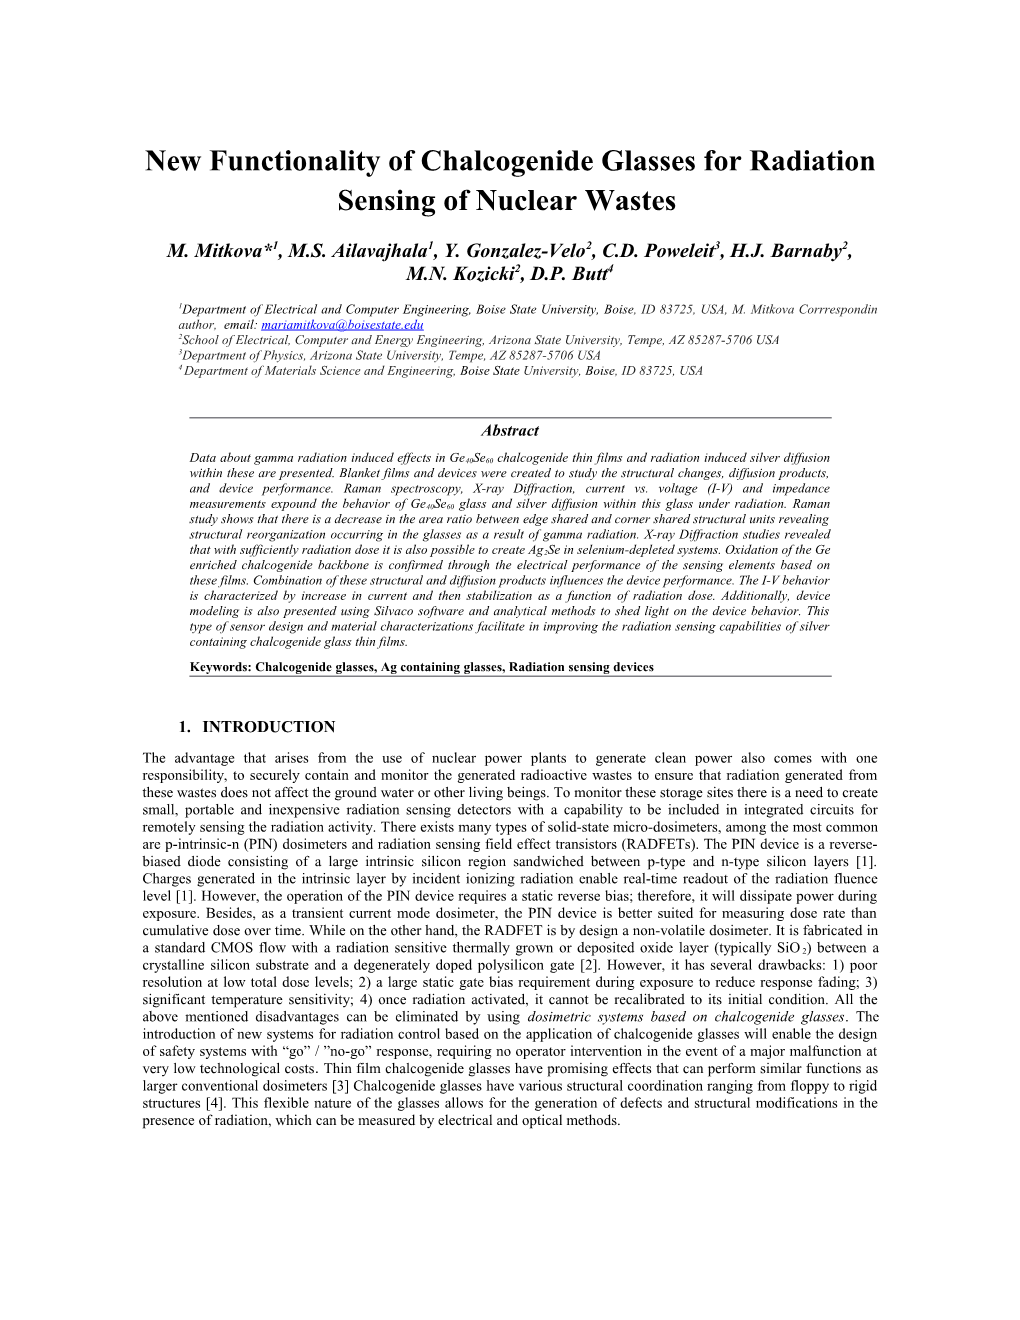 New Functionality of Chalcogenide Glasses for Radiation Sensing of Nuclear Wastes